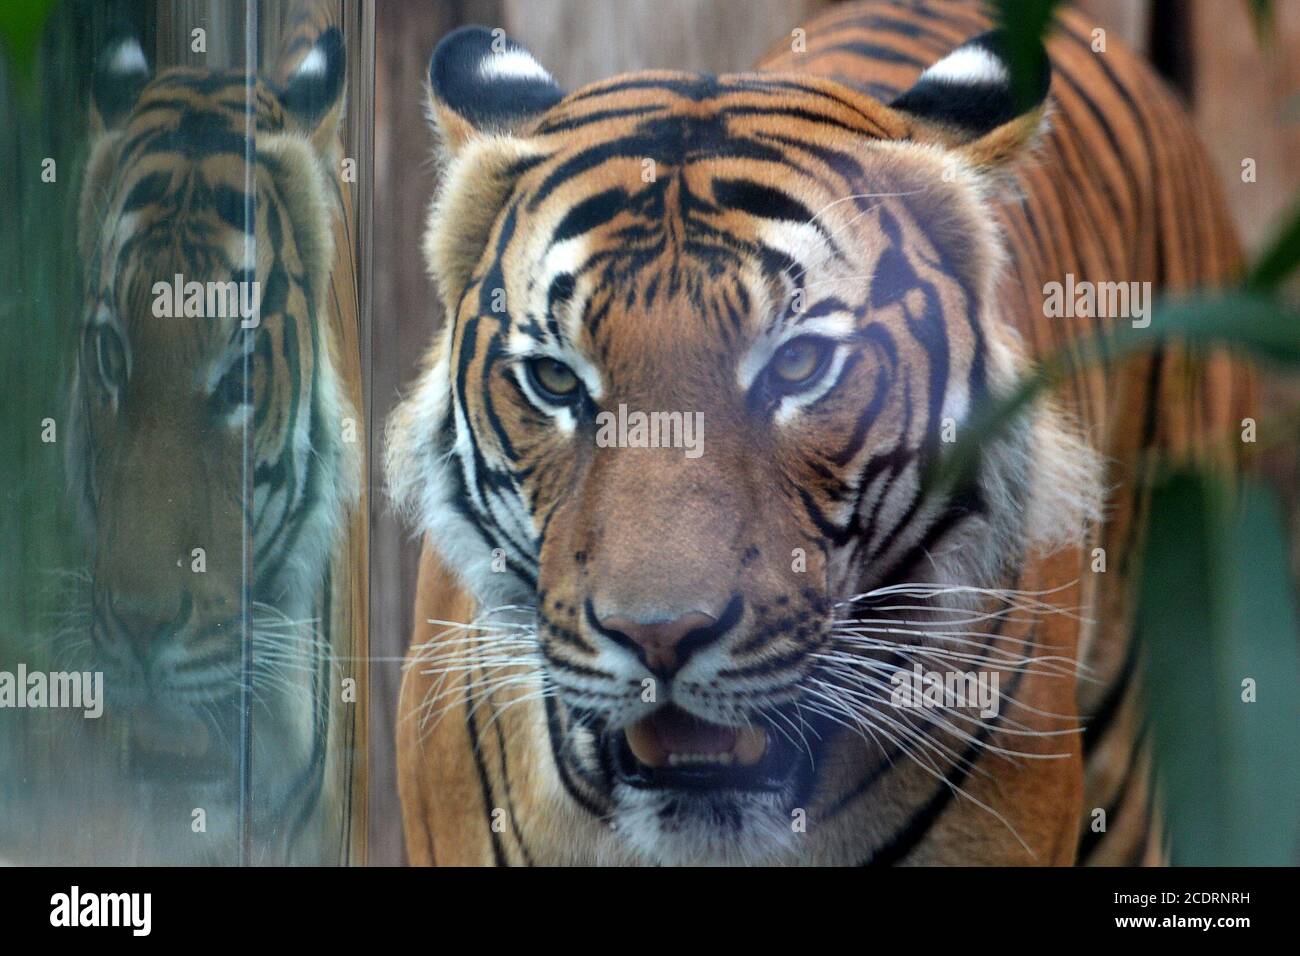 Usti Nad Labem, Czech Republic. 29th Aug, 2020. Two years old Malayan tiger  called Bulan looks at itself reflected in glass in enclosure at the Usti  nad Labem Zoo. In the Malay